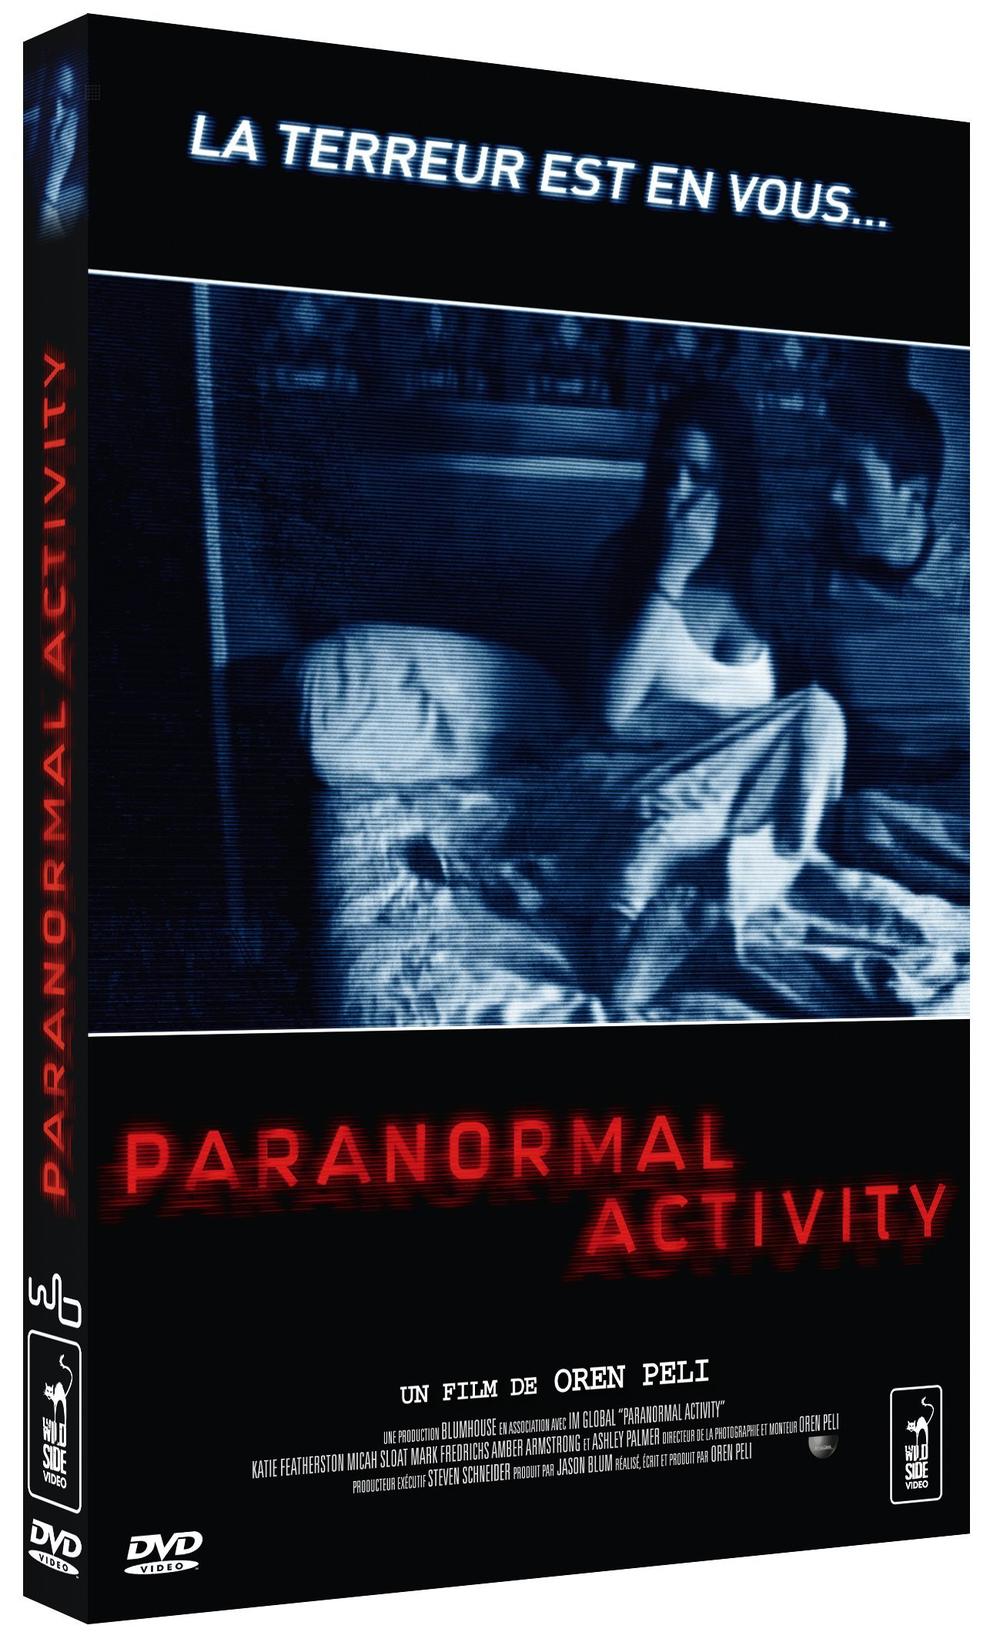 PARANORMAL ACTIVITY